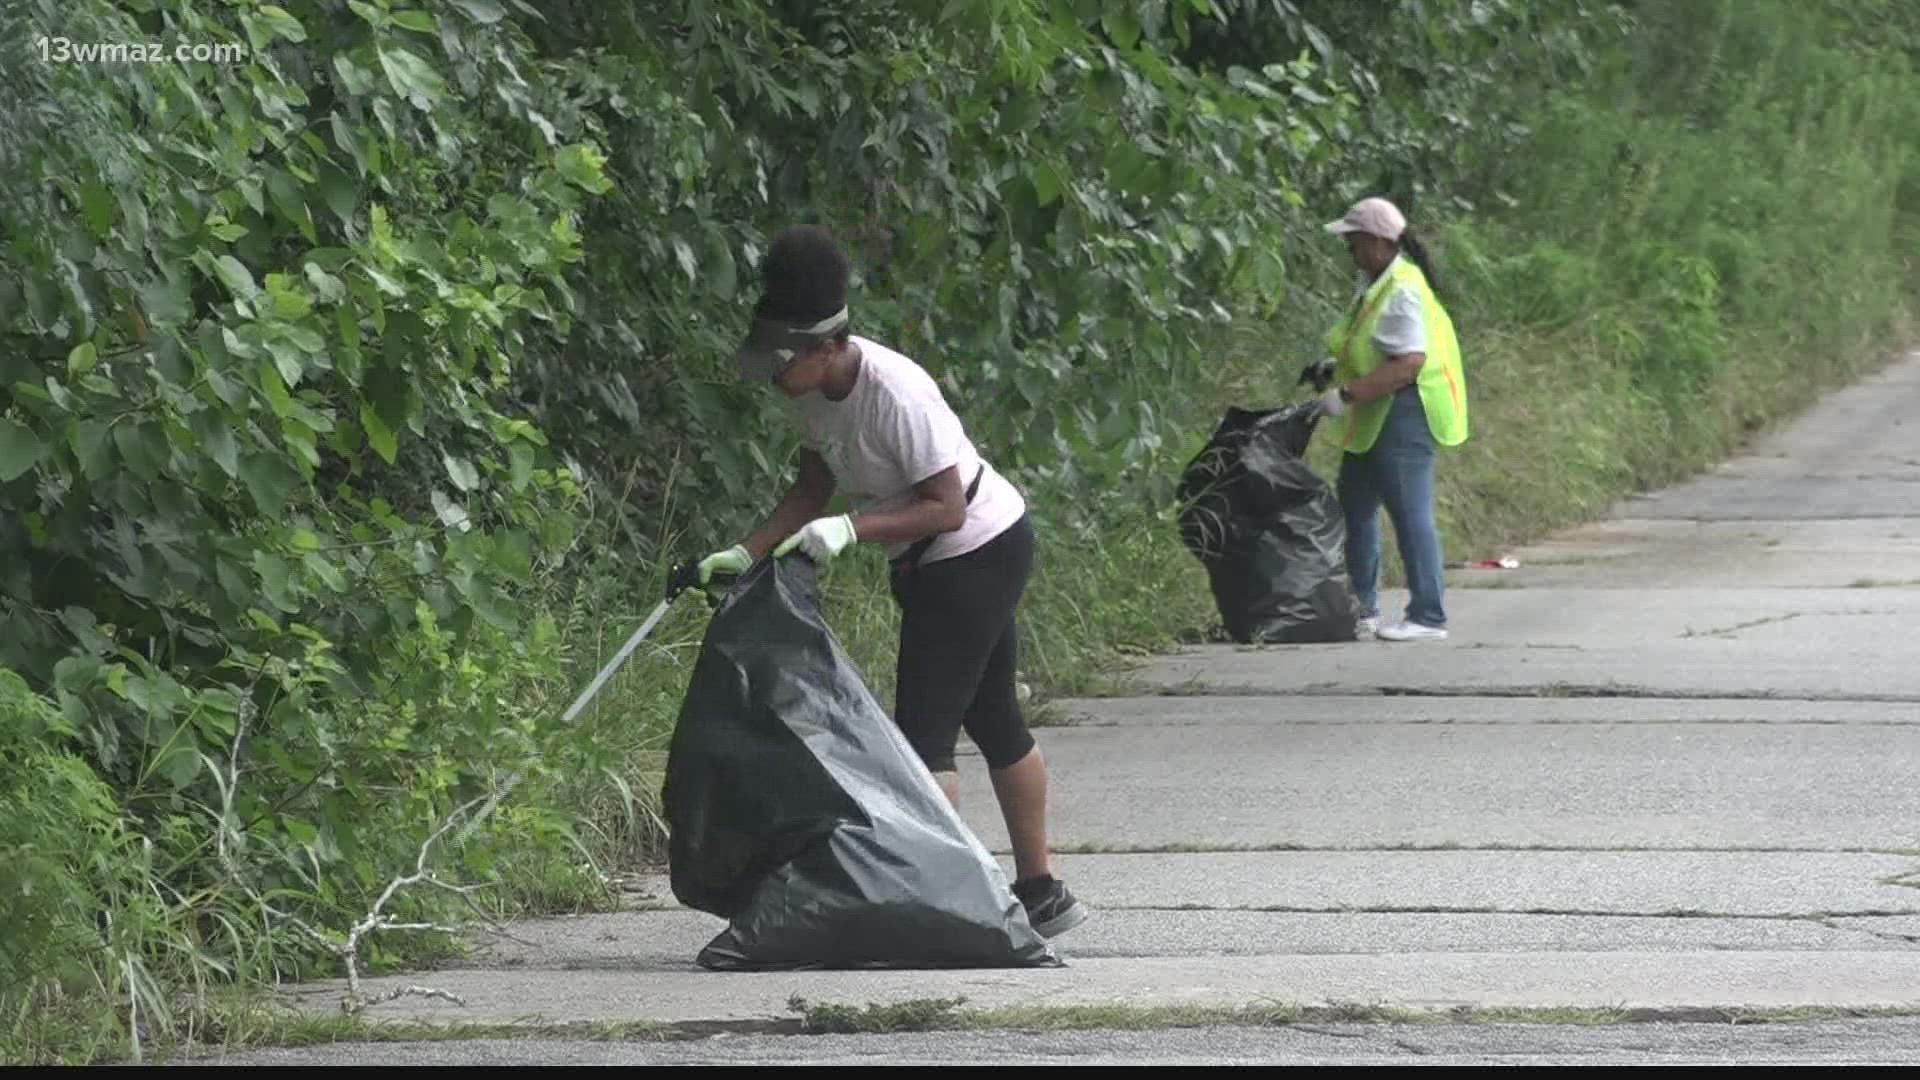 The Historic Vineville Neighborhood Association partnered with Keep Macon-Bibb Beautiful to host a community cleanup.